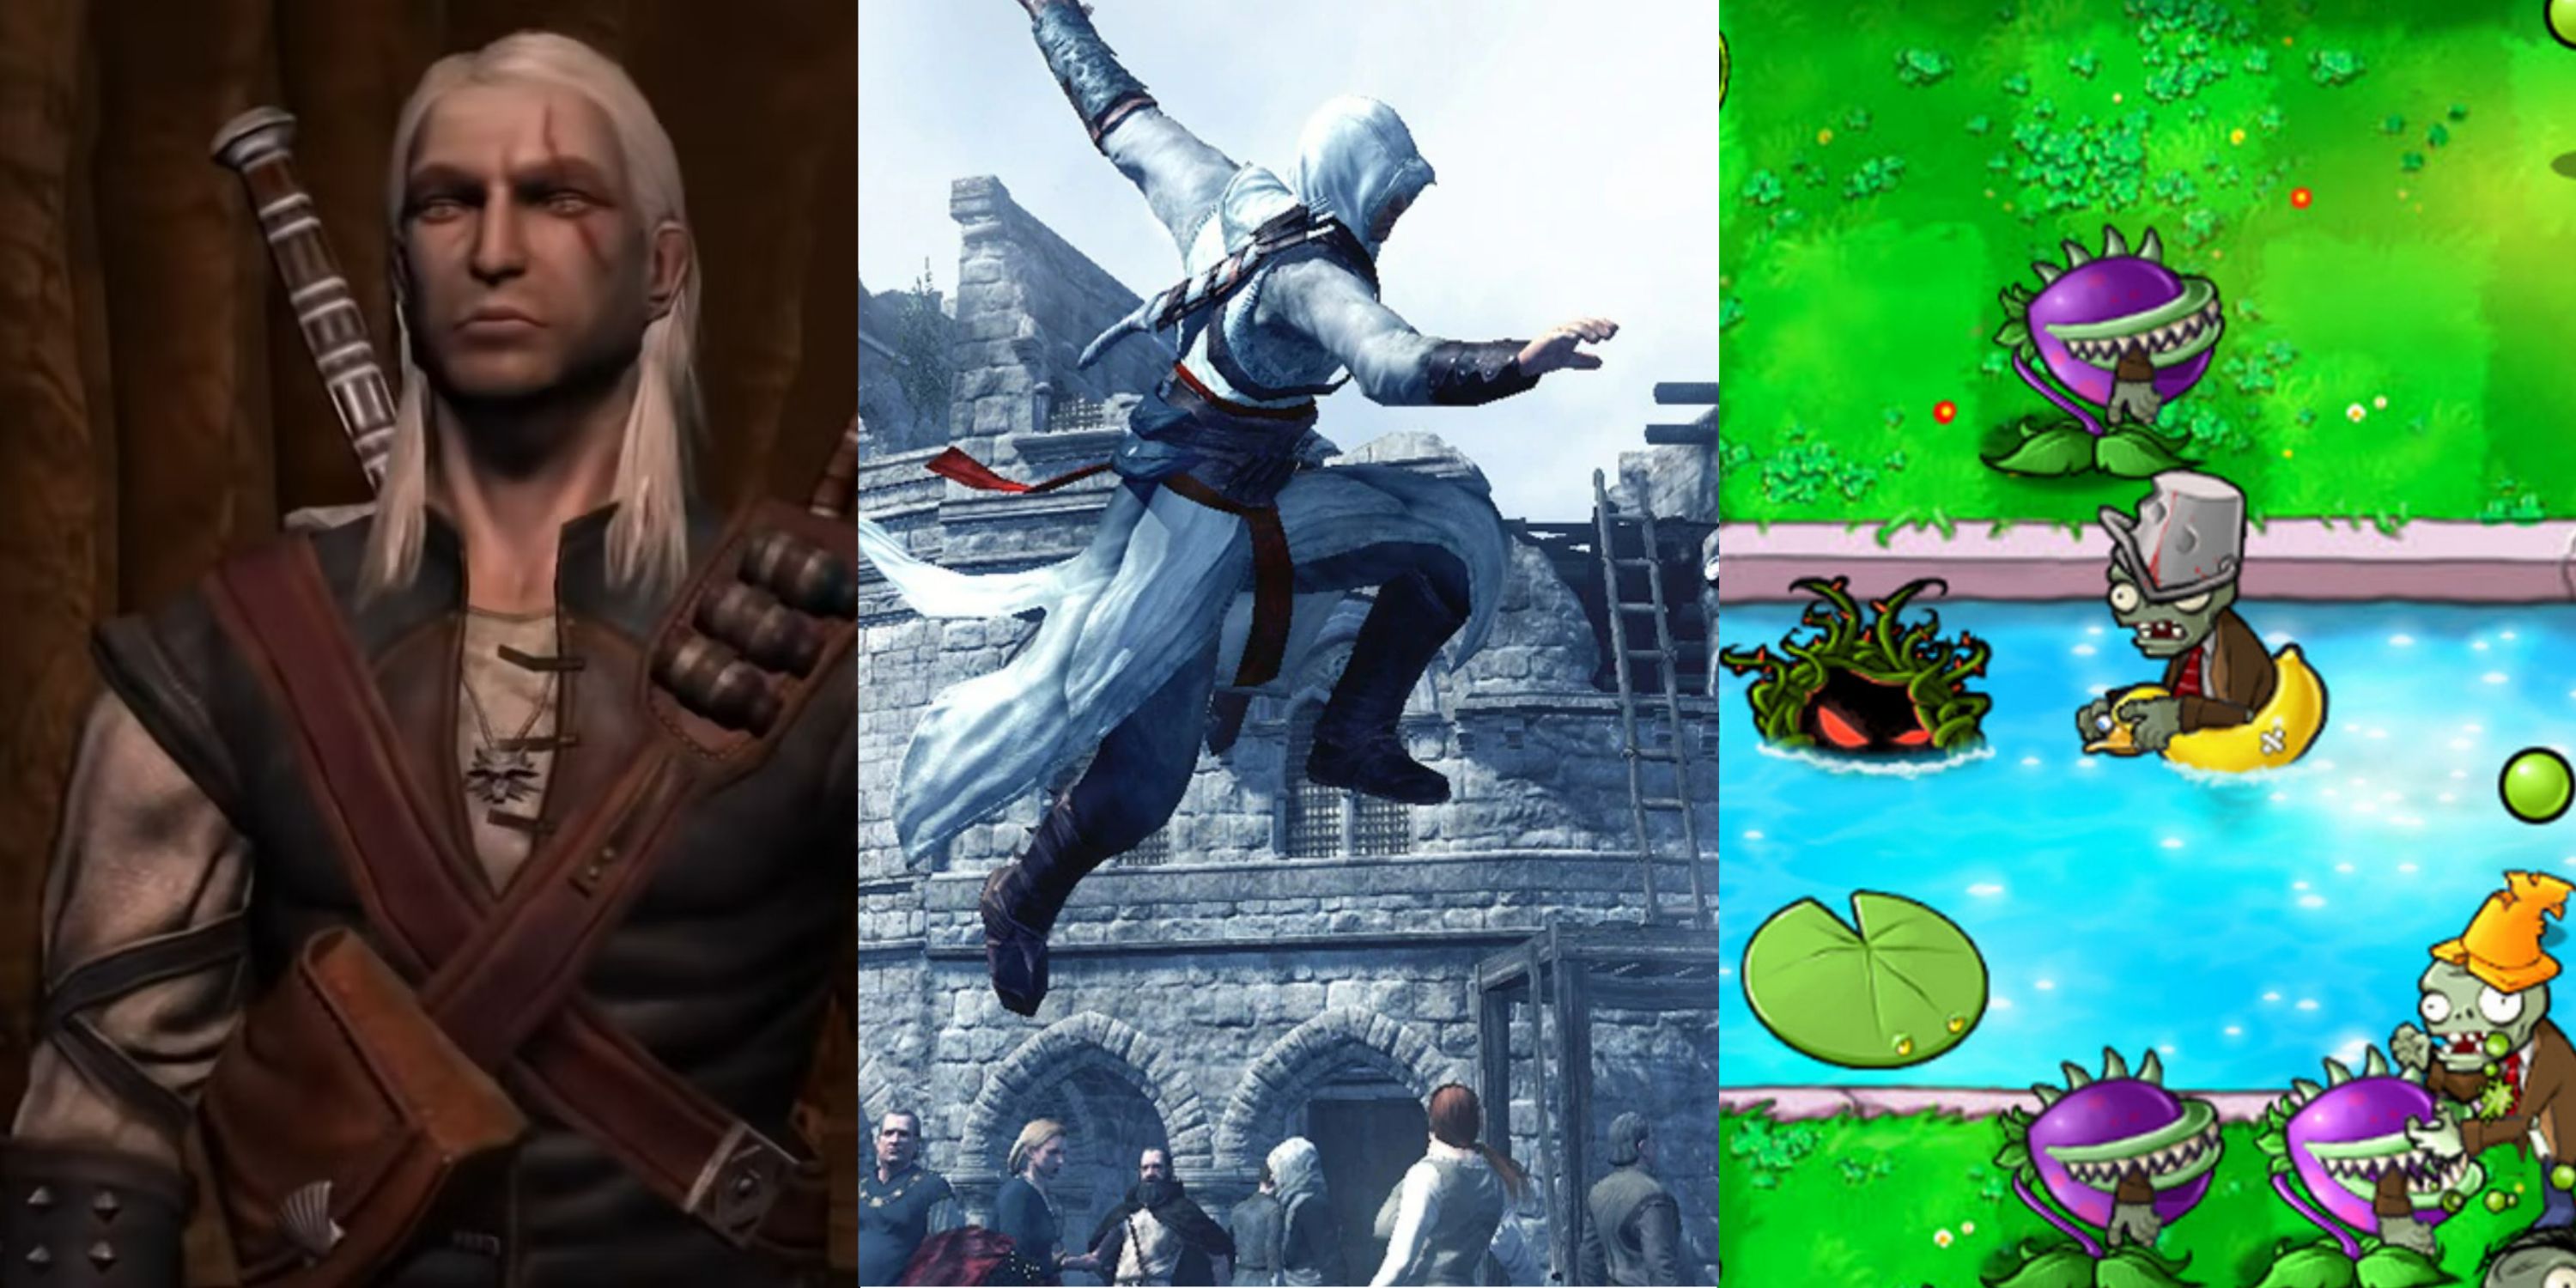 Original Witcher, Assassin's Creed, and Plants Vs Zombies